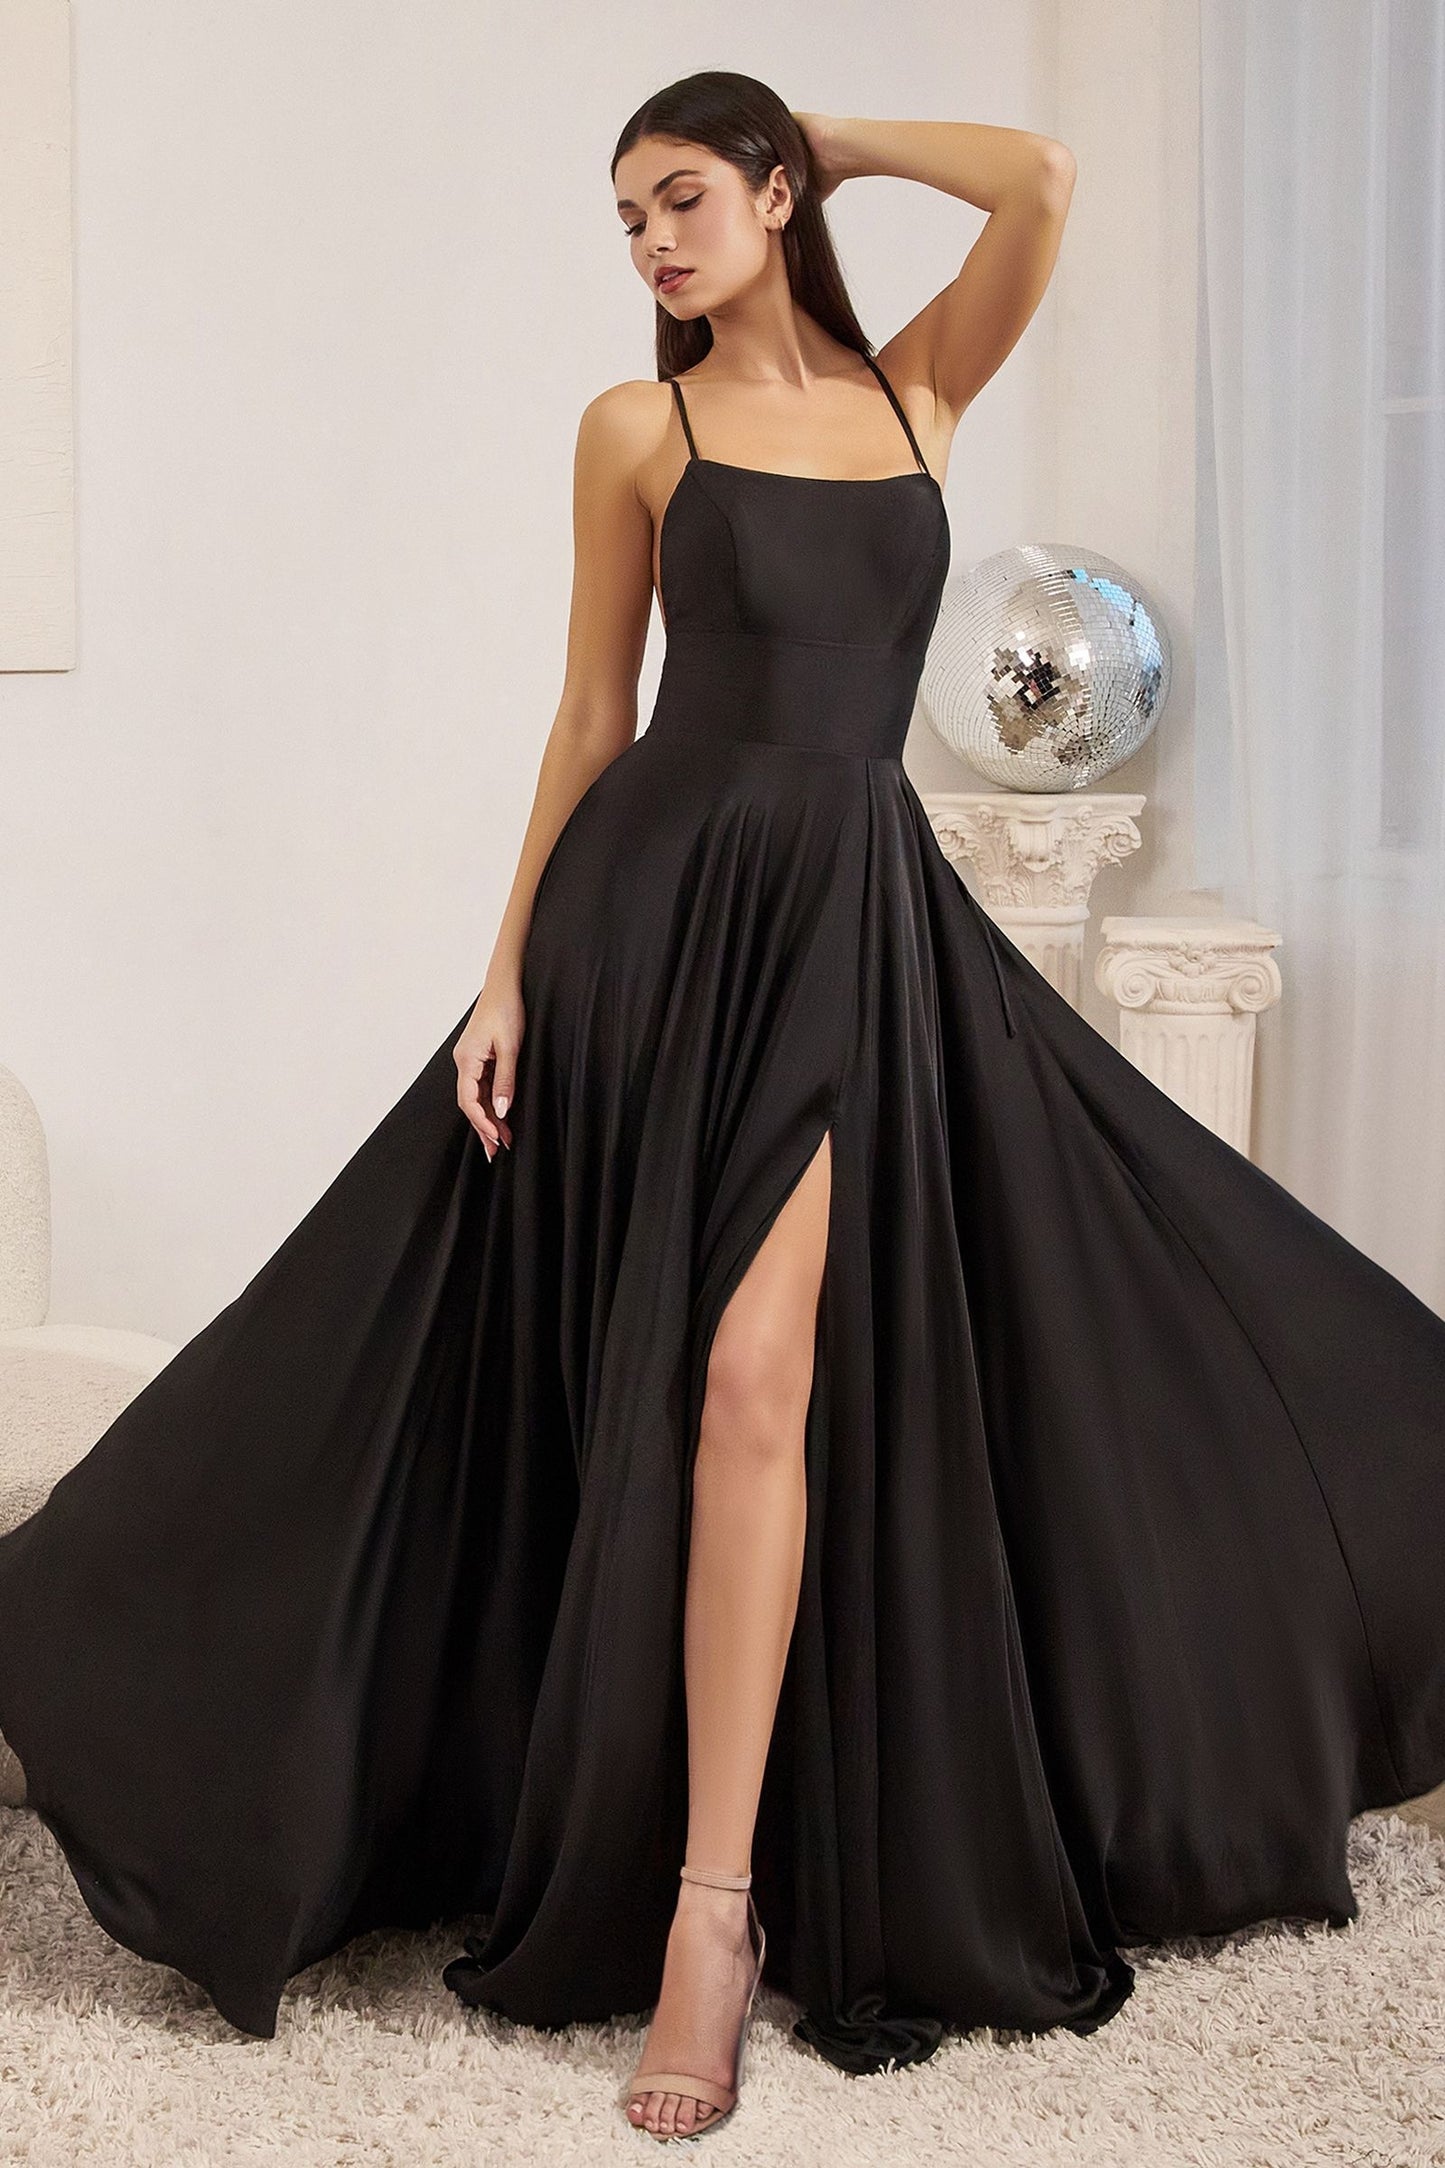 Satin A-Line Dress With Lace Up Back